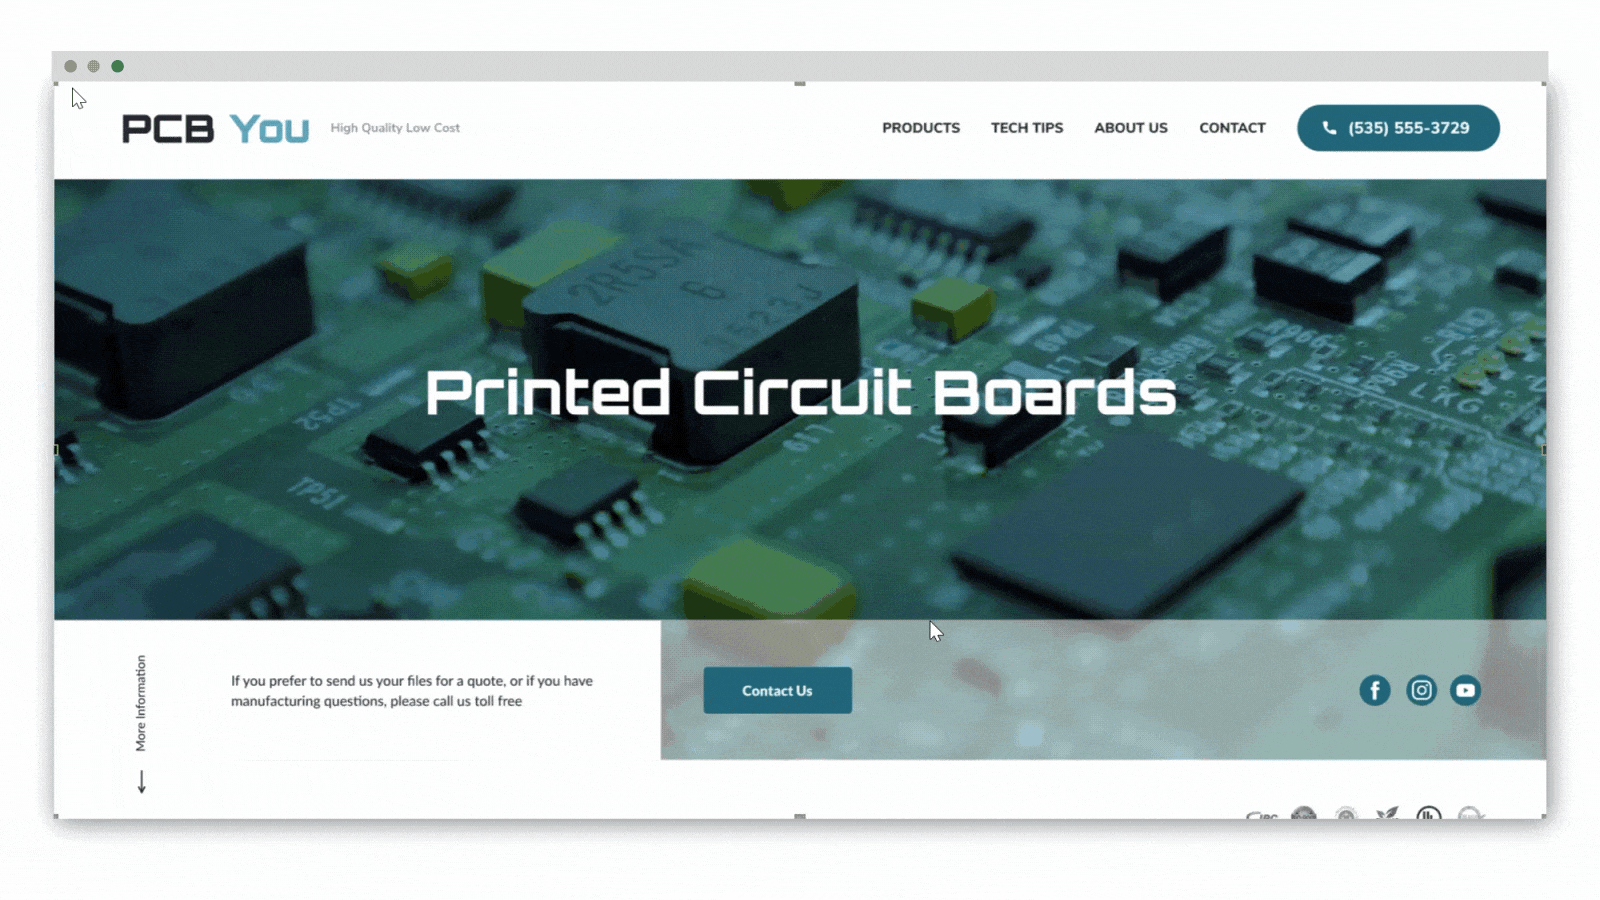 PCB You Home page - Desktop scrolling animation